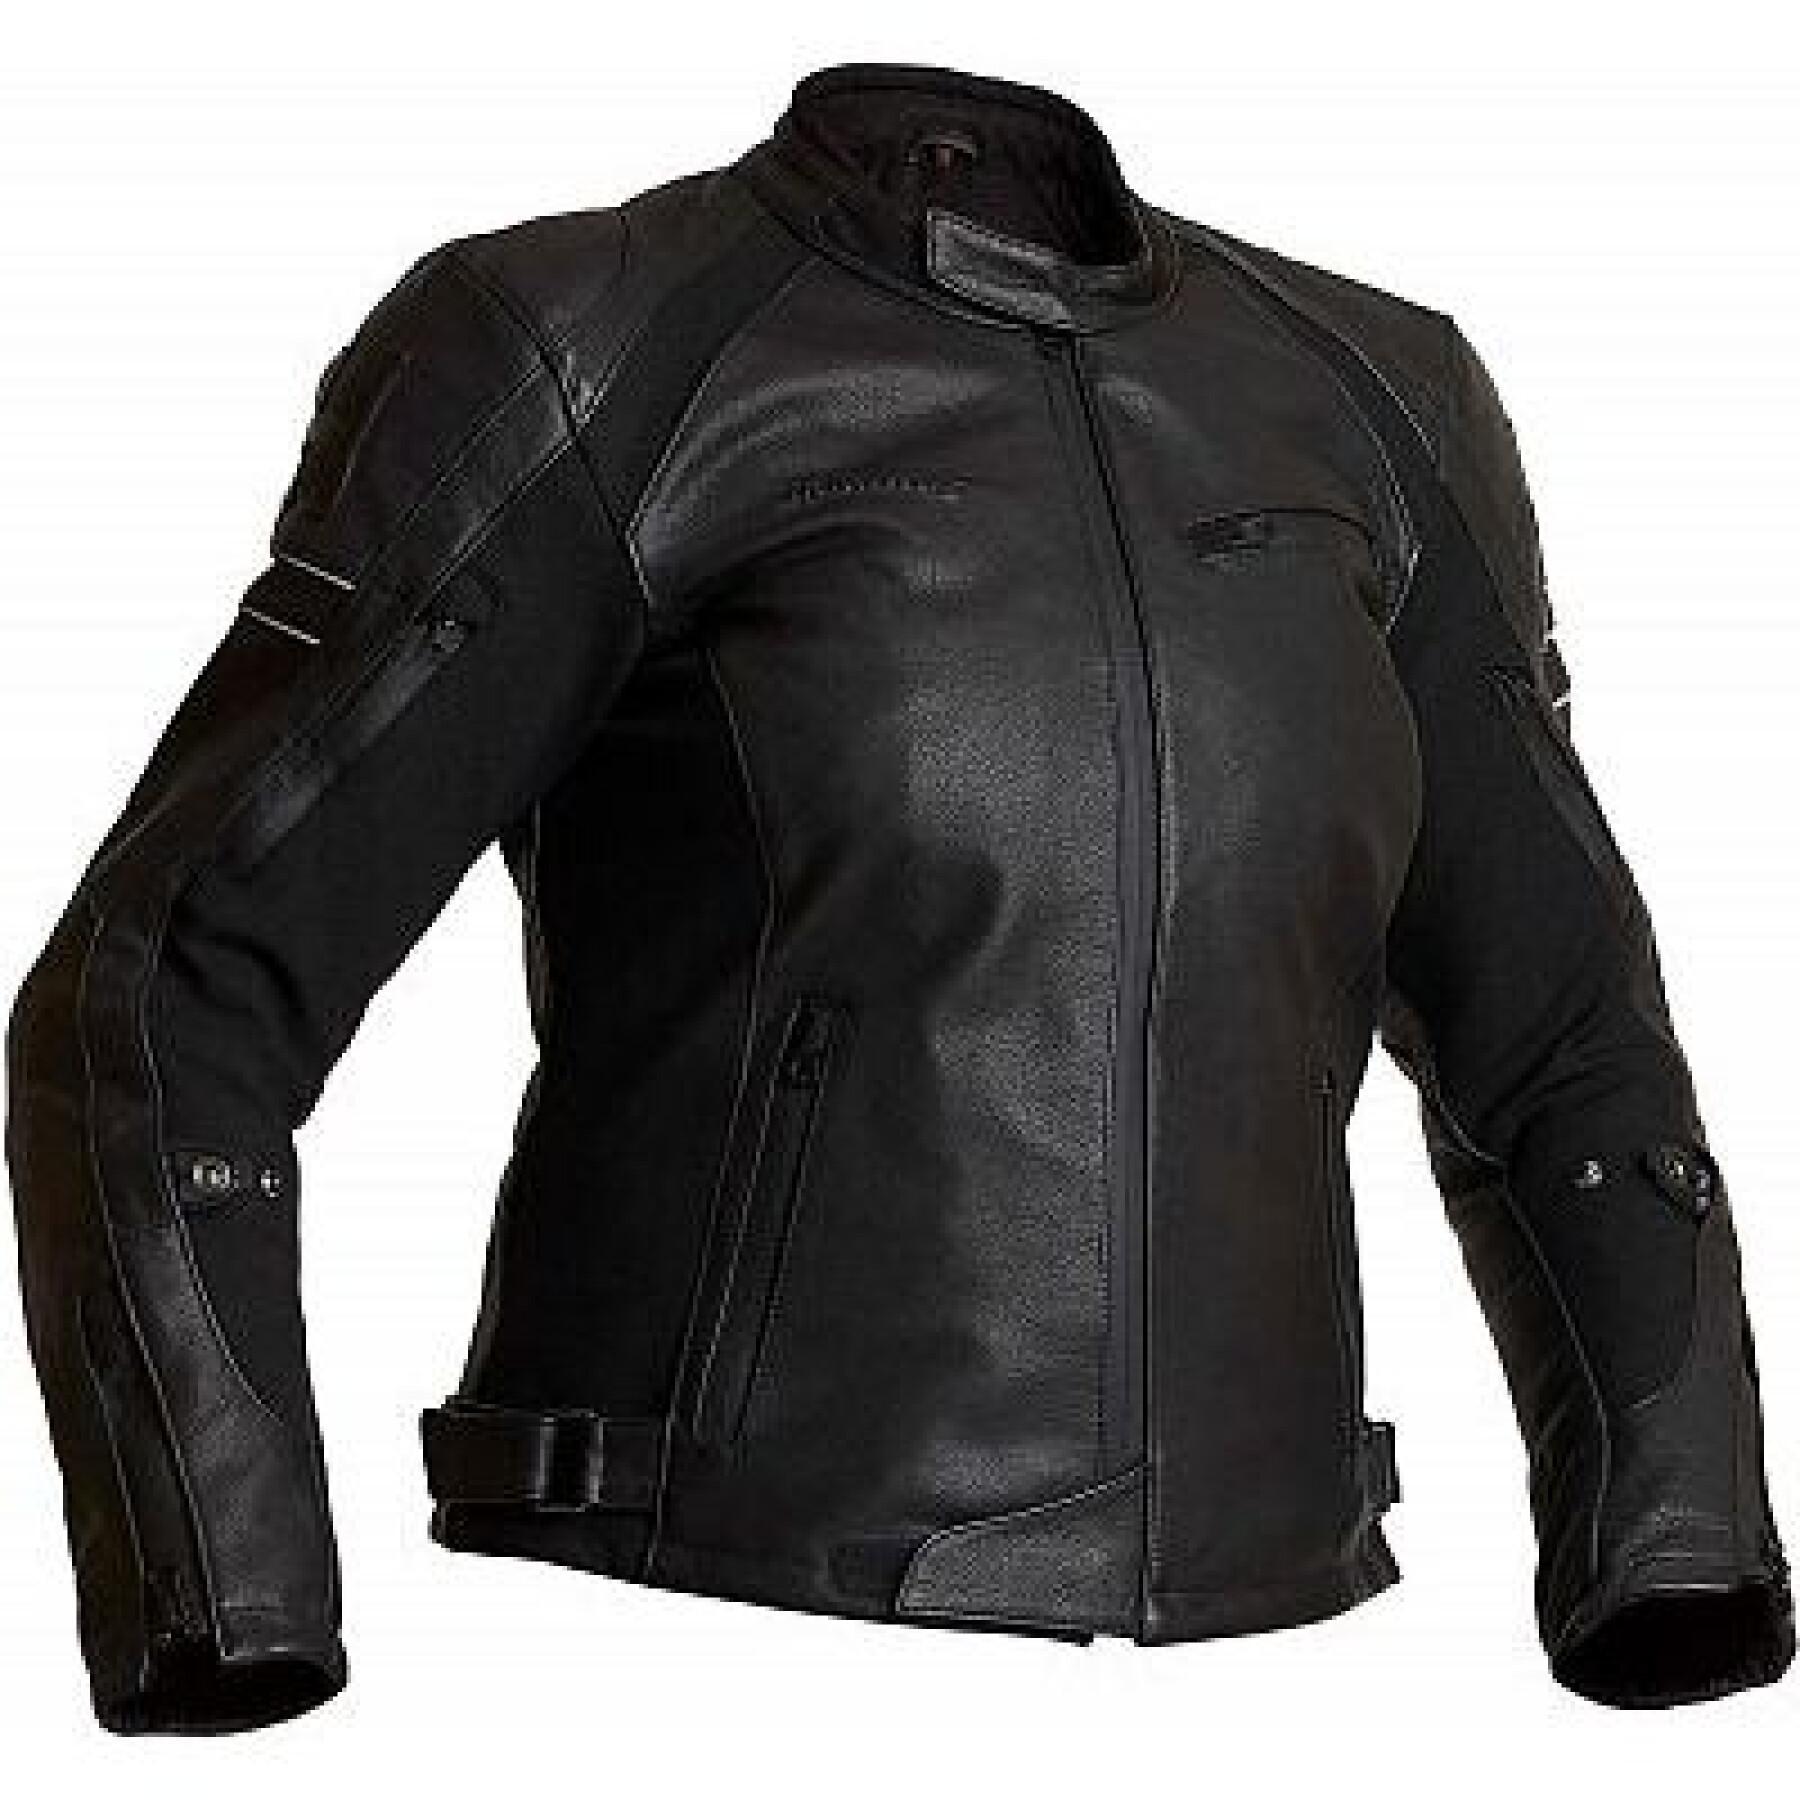 Leather motorcycle jacket for women Halvarssons Risberg